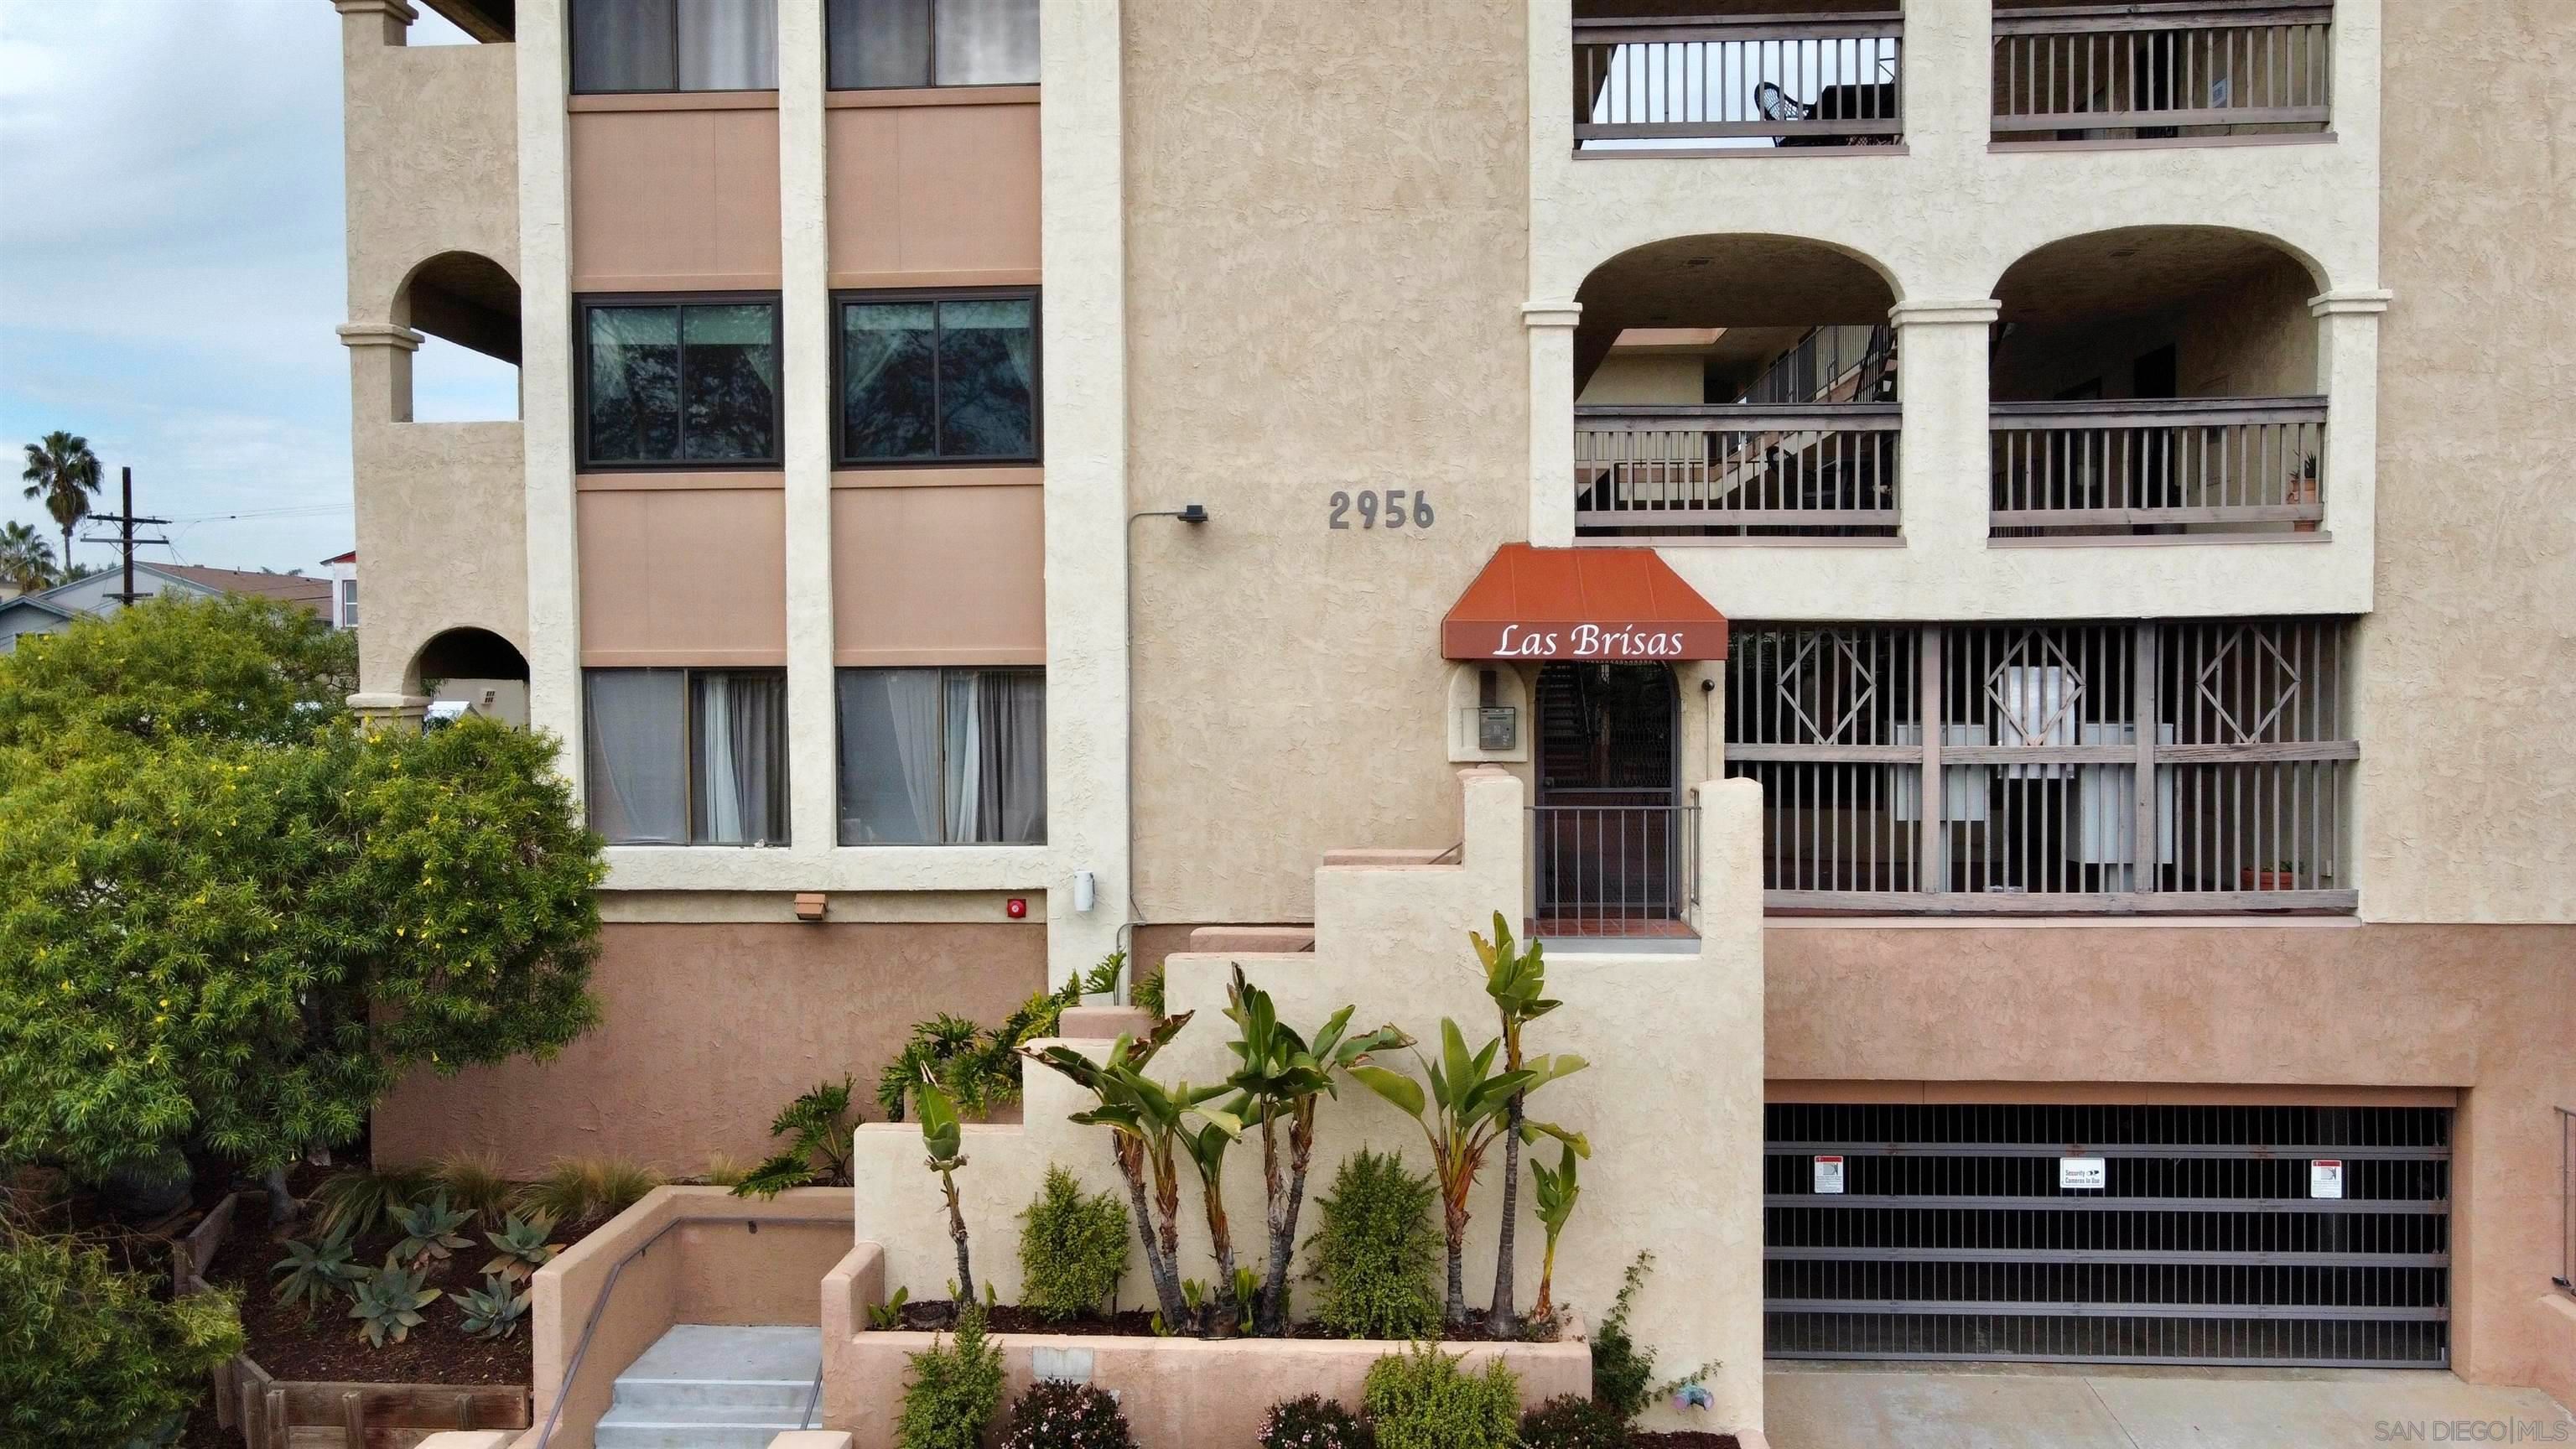 Main Photo: SAN DIEGO Condo for sale : 2 bedrooms : 2956 C St #21